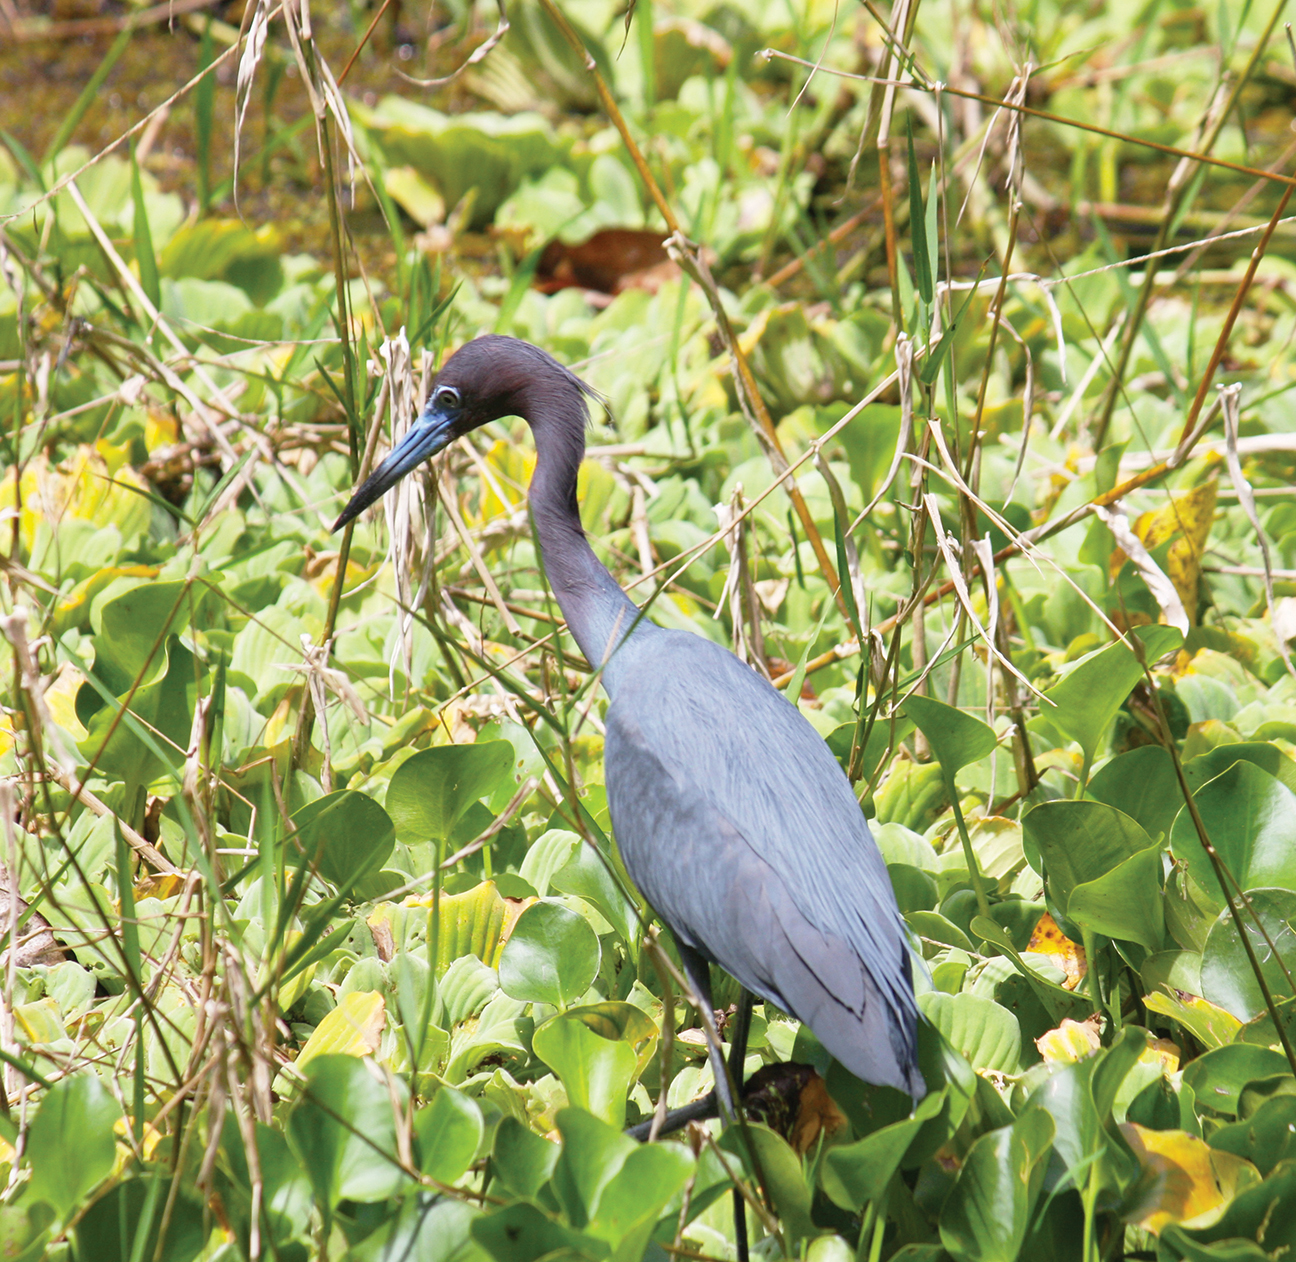 A heron walks amongst the greenery at the Corkscrew Swamp Sanctuary. Birdwatching is just one activity to get kids interested in nature, which can boost their health.